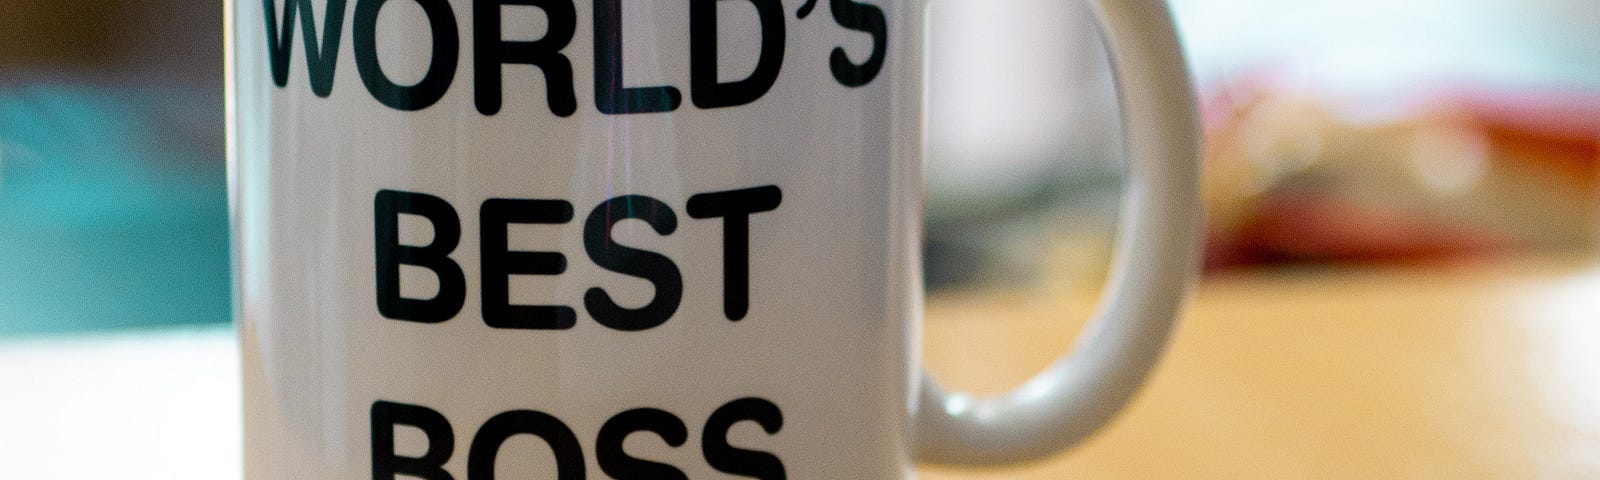 A mug that says “World’s Best Boss” is on a desk.